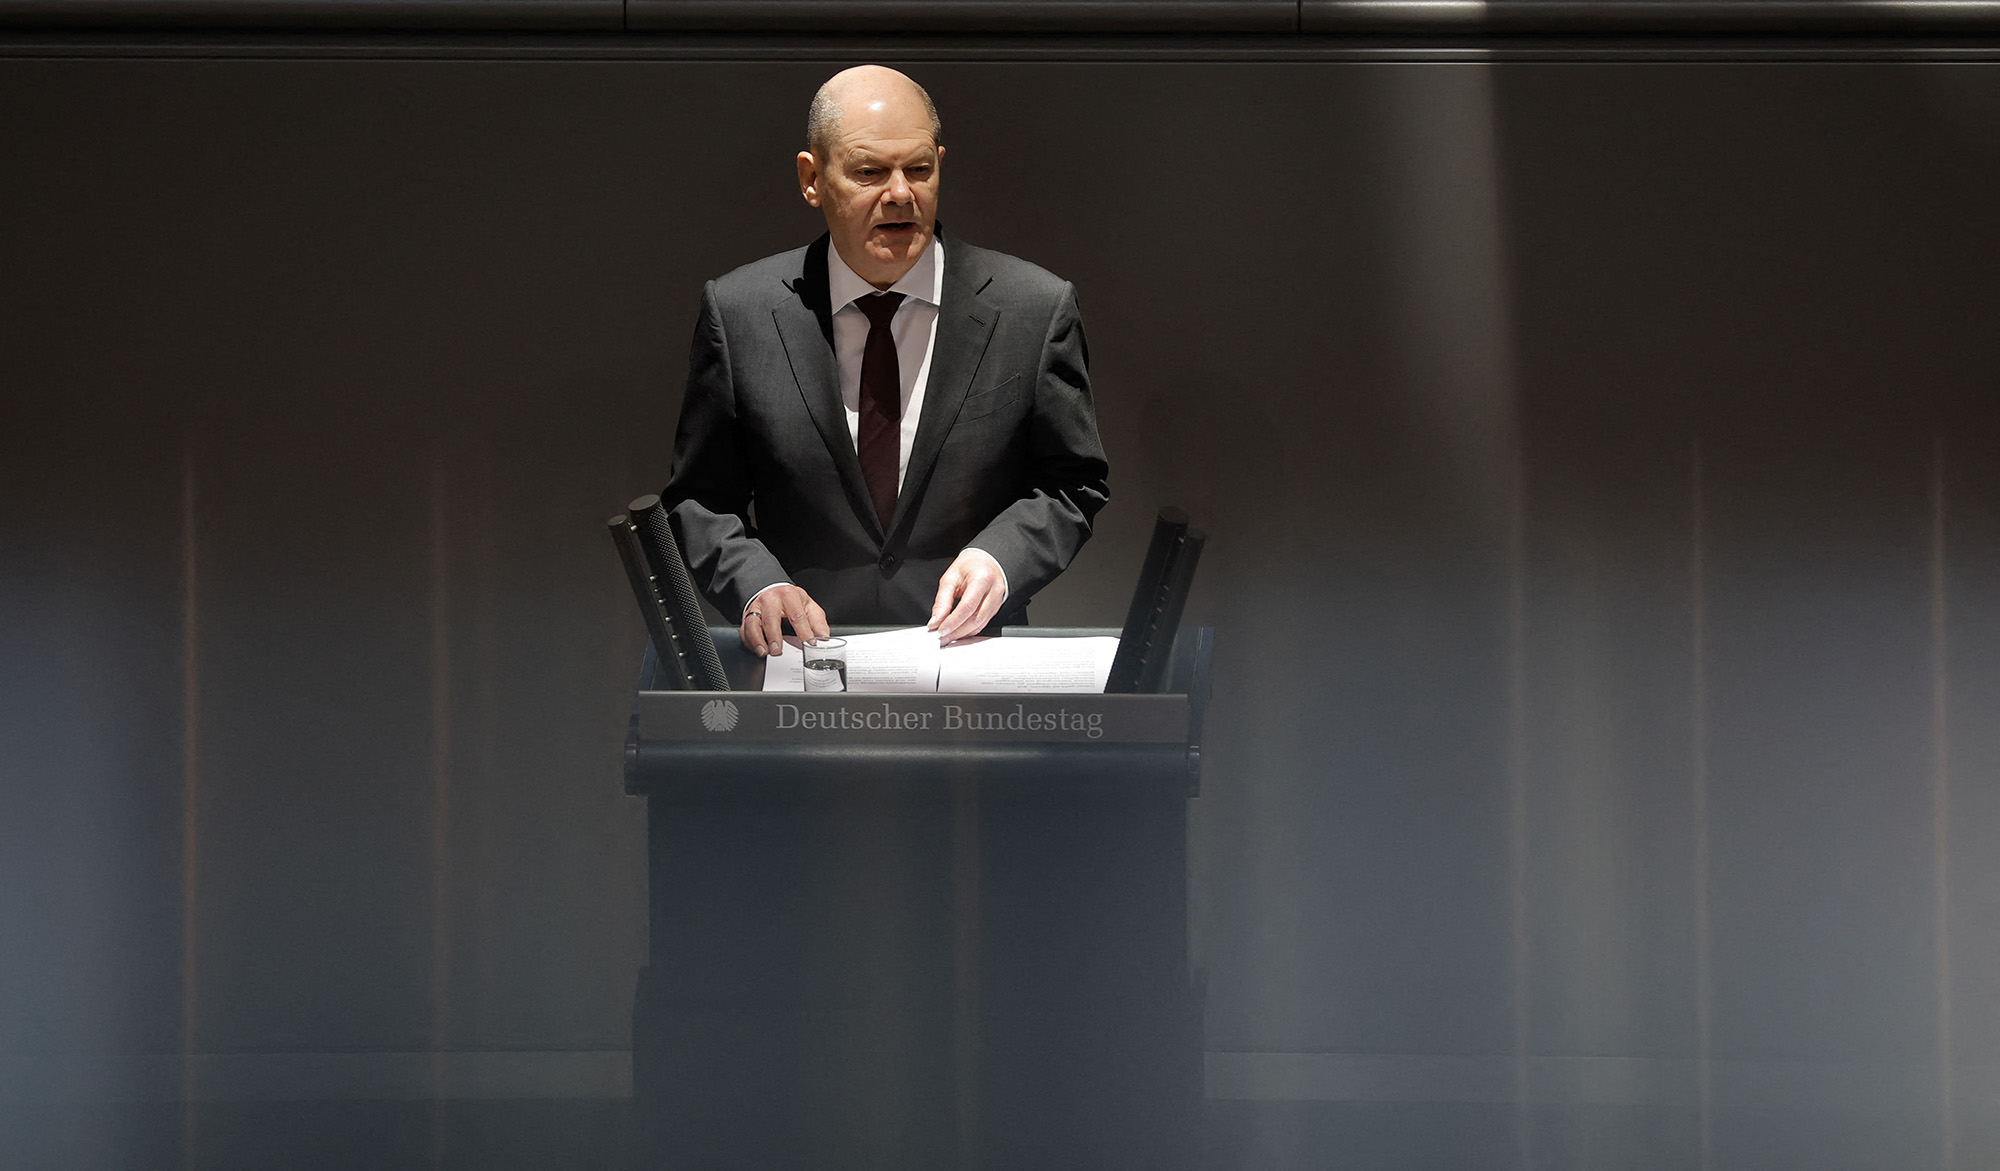 German Chancellor Olaf Scholz addresses delegates on March 16, at the Bundestag (lower house of parliament) in Berlin, Germay.